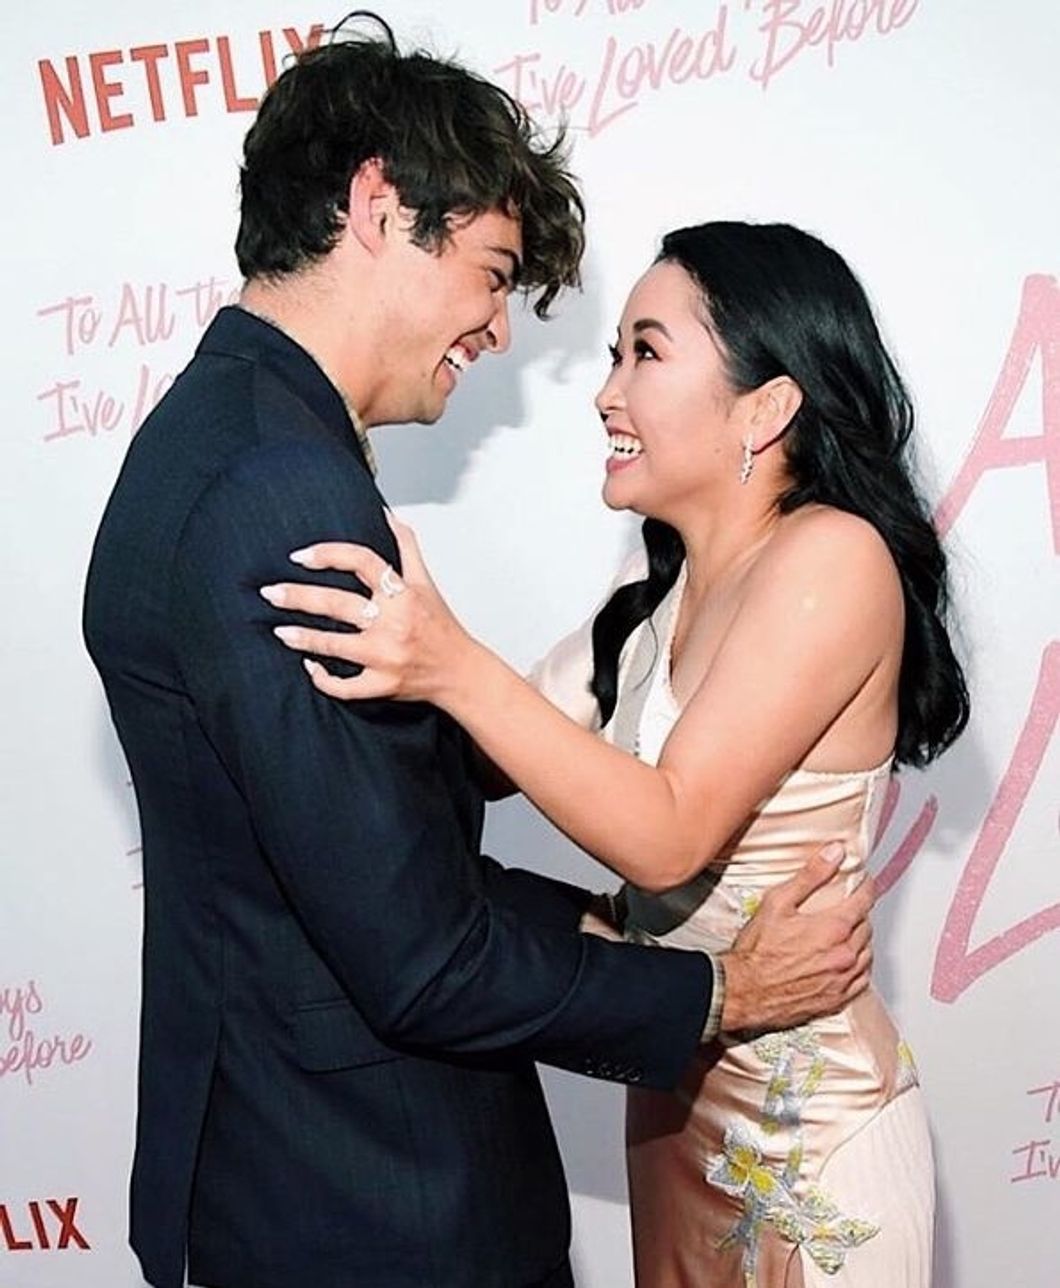 'To All The Boys I've Loved Before' Lives Up To All The Hype